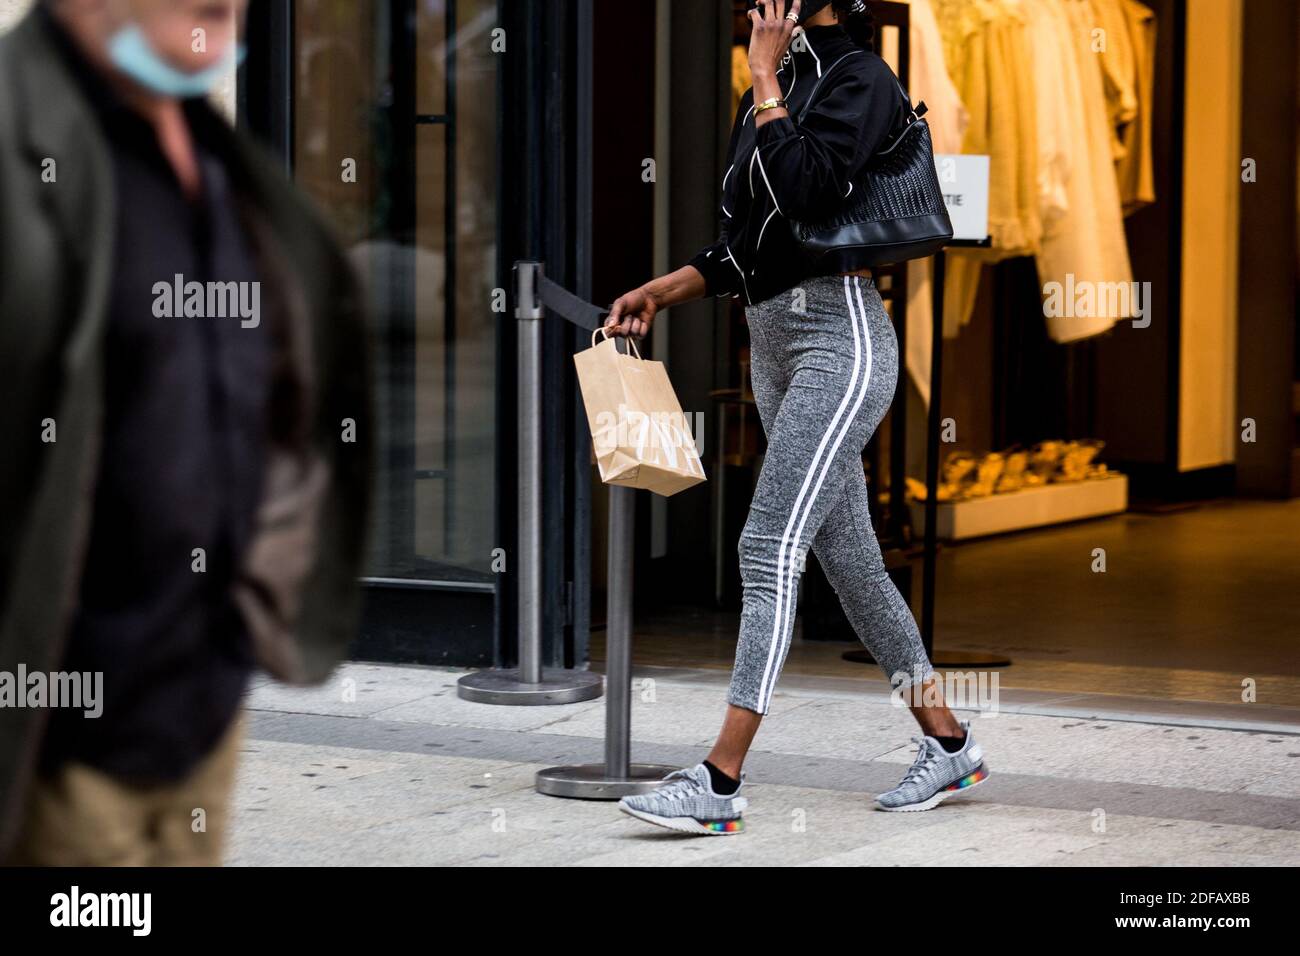 Zara company plans to close between 1,000 and 1,200 stores among its 7,400  stores worldwide. Objective: capitalize on the success of its online sales  during Lockdown. on June 15, 2020 in Paris,